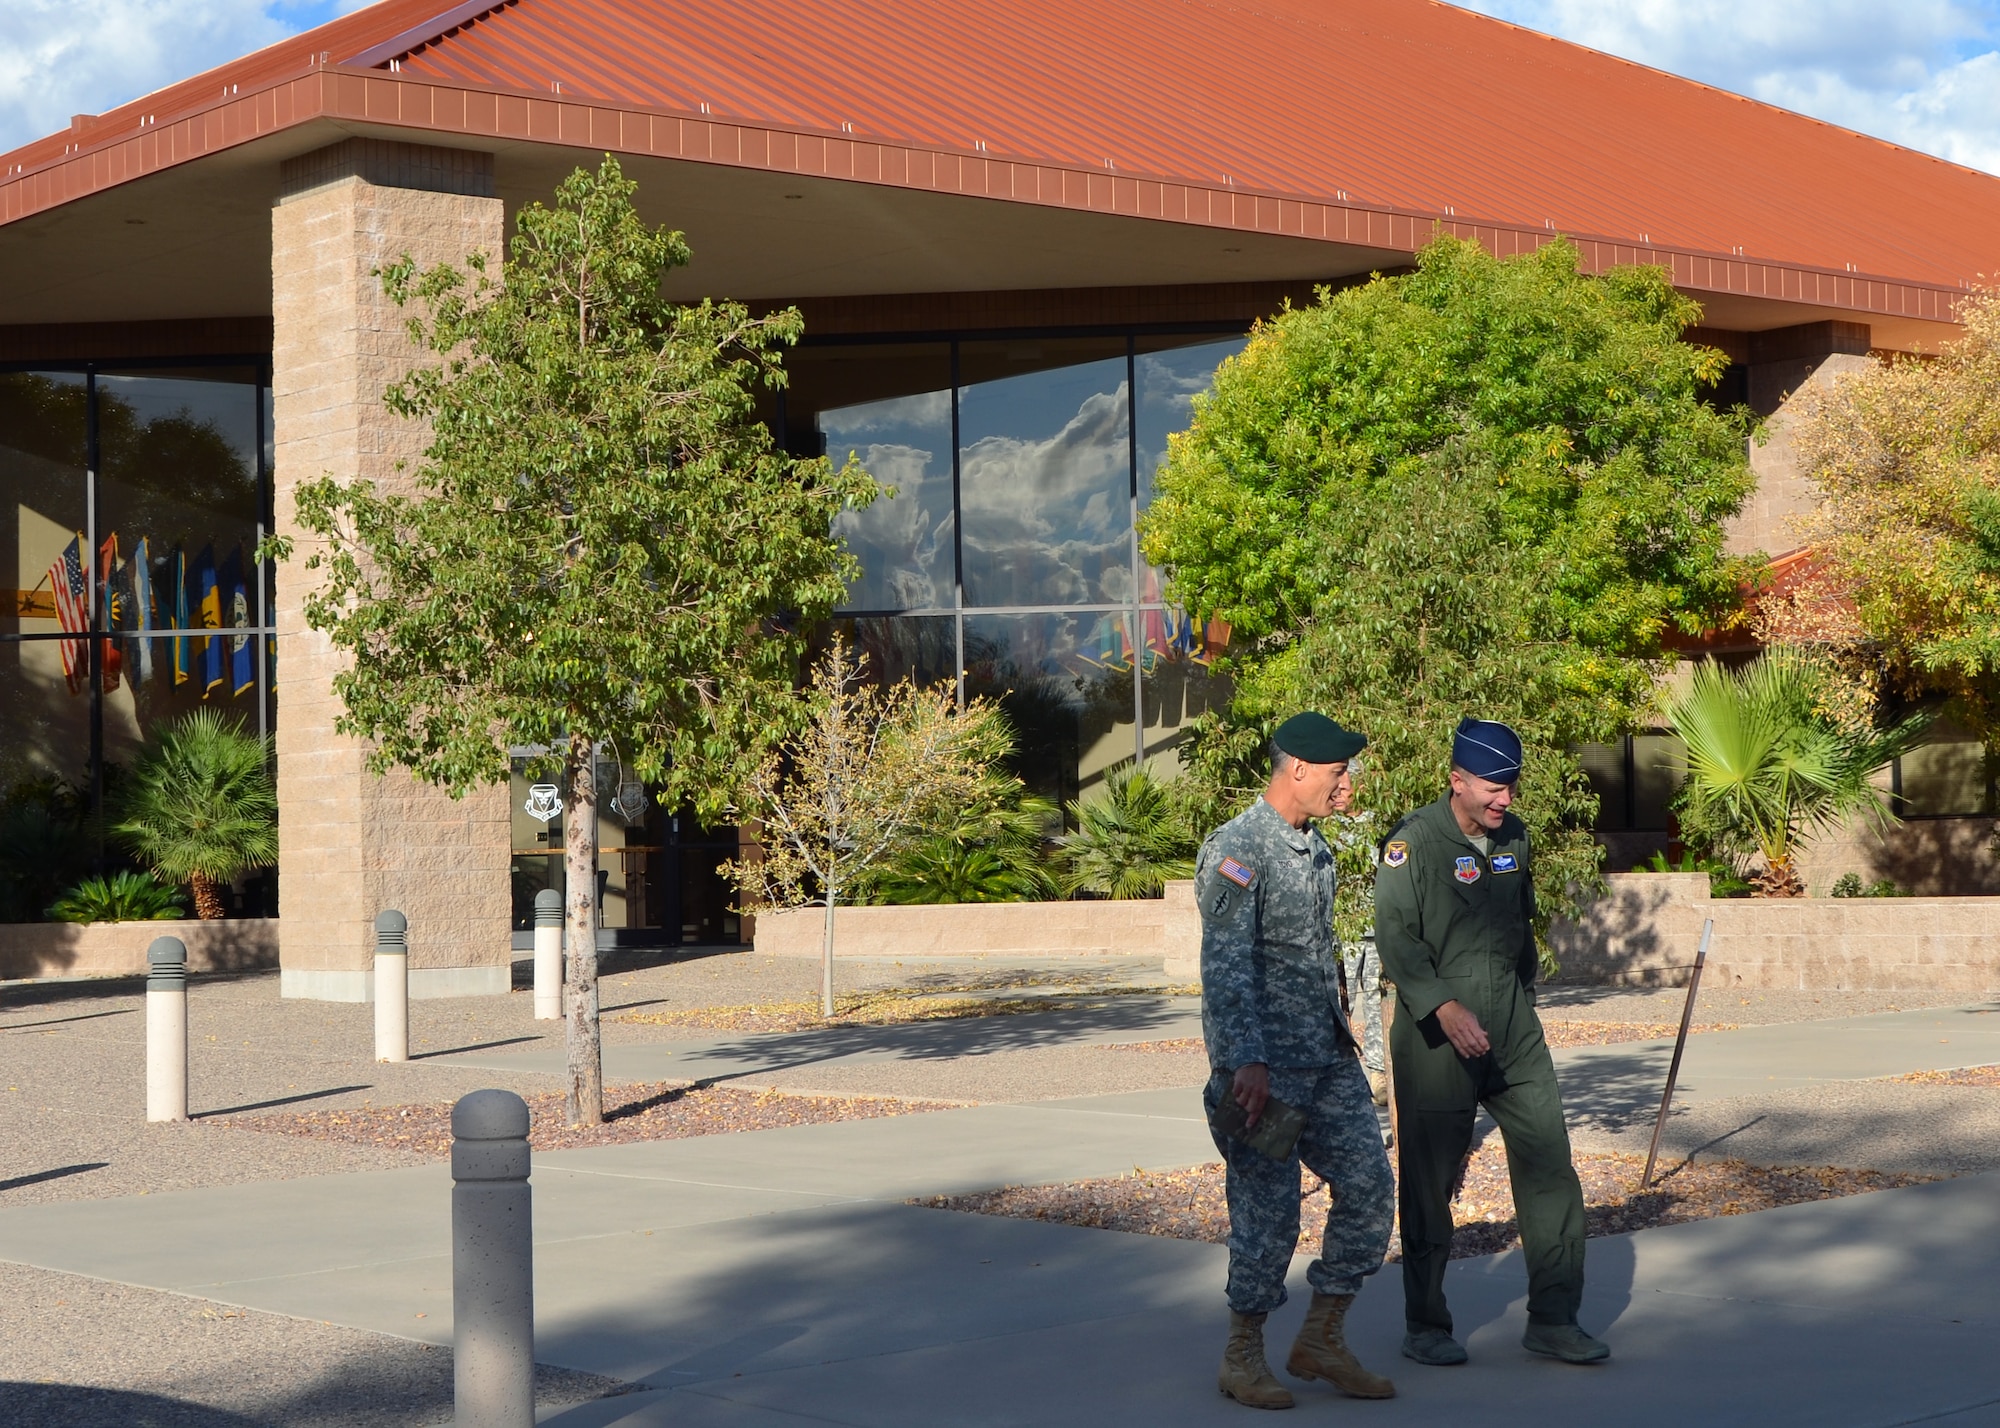 U.S. Army Lt. Gen. Ken Tovo, U.S. Southern Command military deputy commander, talks with U.S. Air Force Lt. Gen. Tod Wolters, 12th Air Force (Air Forces Southern) commander, Monday in front of the 12 AF (AFSOUTH) headquarters at Davis-Monthan Air Force Base, Ariz.  General Tovo visited 12 AF (AFSOUTH) for an orientation and to thank Airmen for their contributions as the air component to U.S. Southern Command. (U.S. Air Force photo/Capt. Justin Brockhoff)